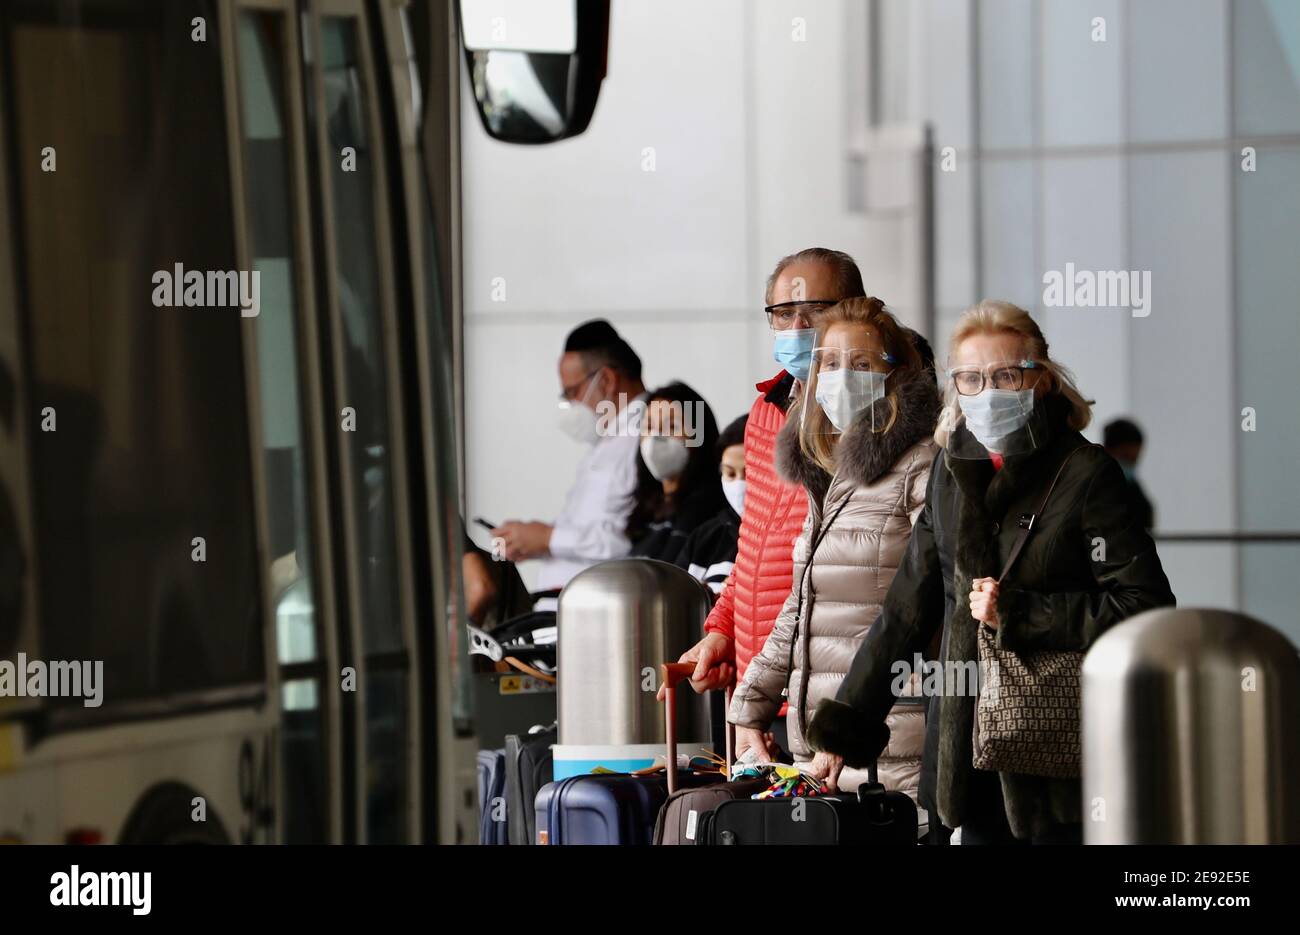 (210202) -- LOS ANGELES, Feb. 2, 2021 (Xinhua) -- Travelers with face masks wait for public transportation services at the International Airport in Los Angeles, California, the United States, on Feb. 1, 2021. Beginning Tuesday, Americans are required to wear face masks while traveling on domestic public transport as part of a national strategy to curb the spread of COVID-19.   The rule, issued by the U.S. Centers for Disease Control and Prevention (CDC), applies to passengers on airplanes, trains, subways, buses, taxis and ride-shares. And it extends to waiting areas such as airports, train pl Stock Photo